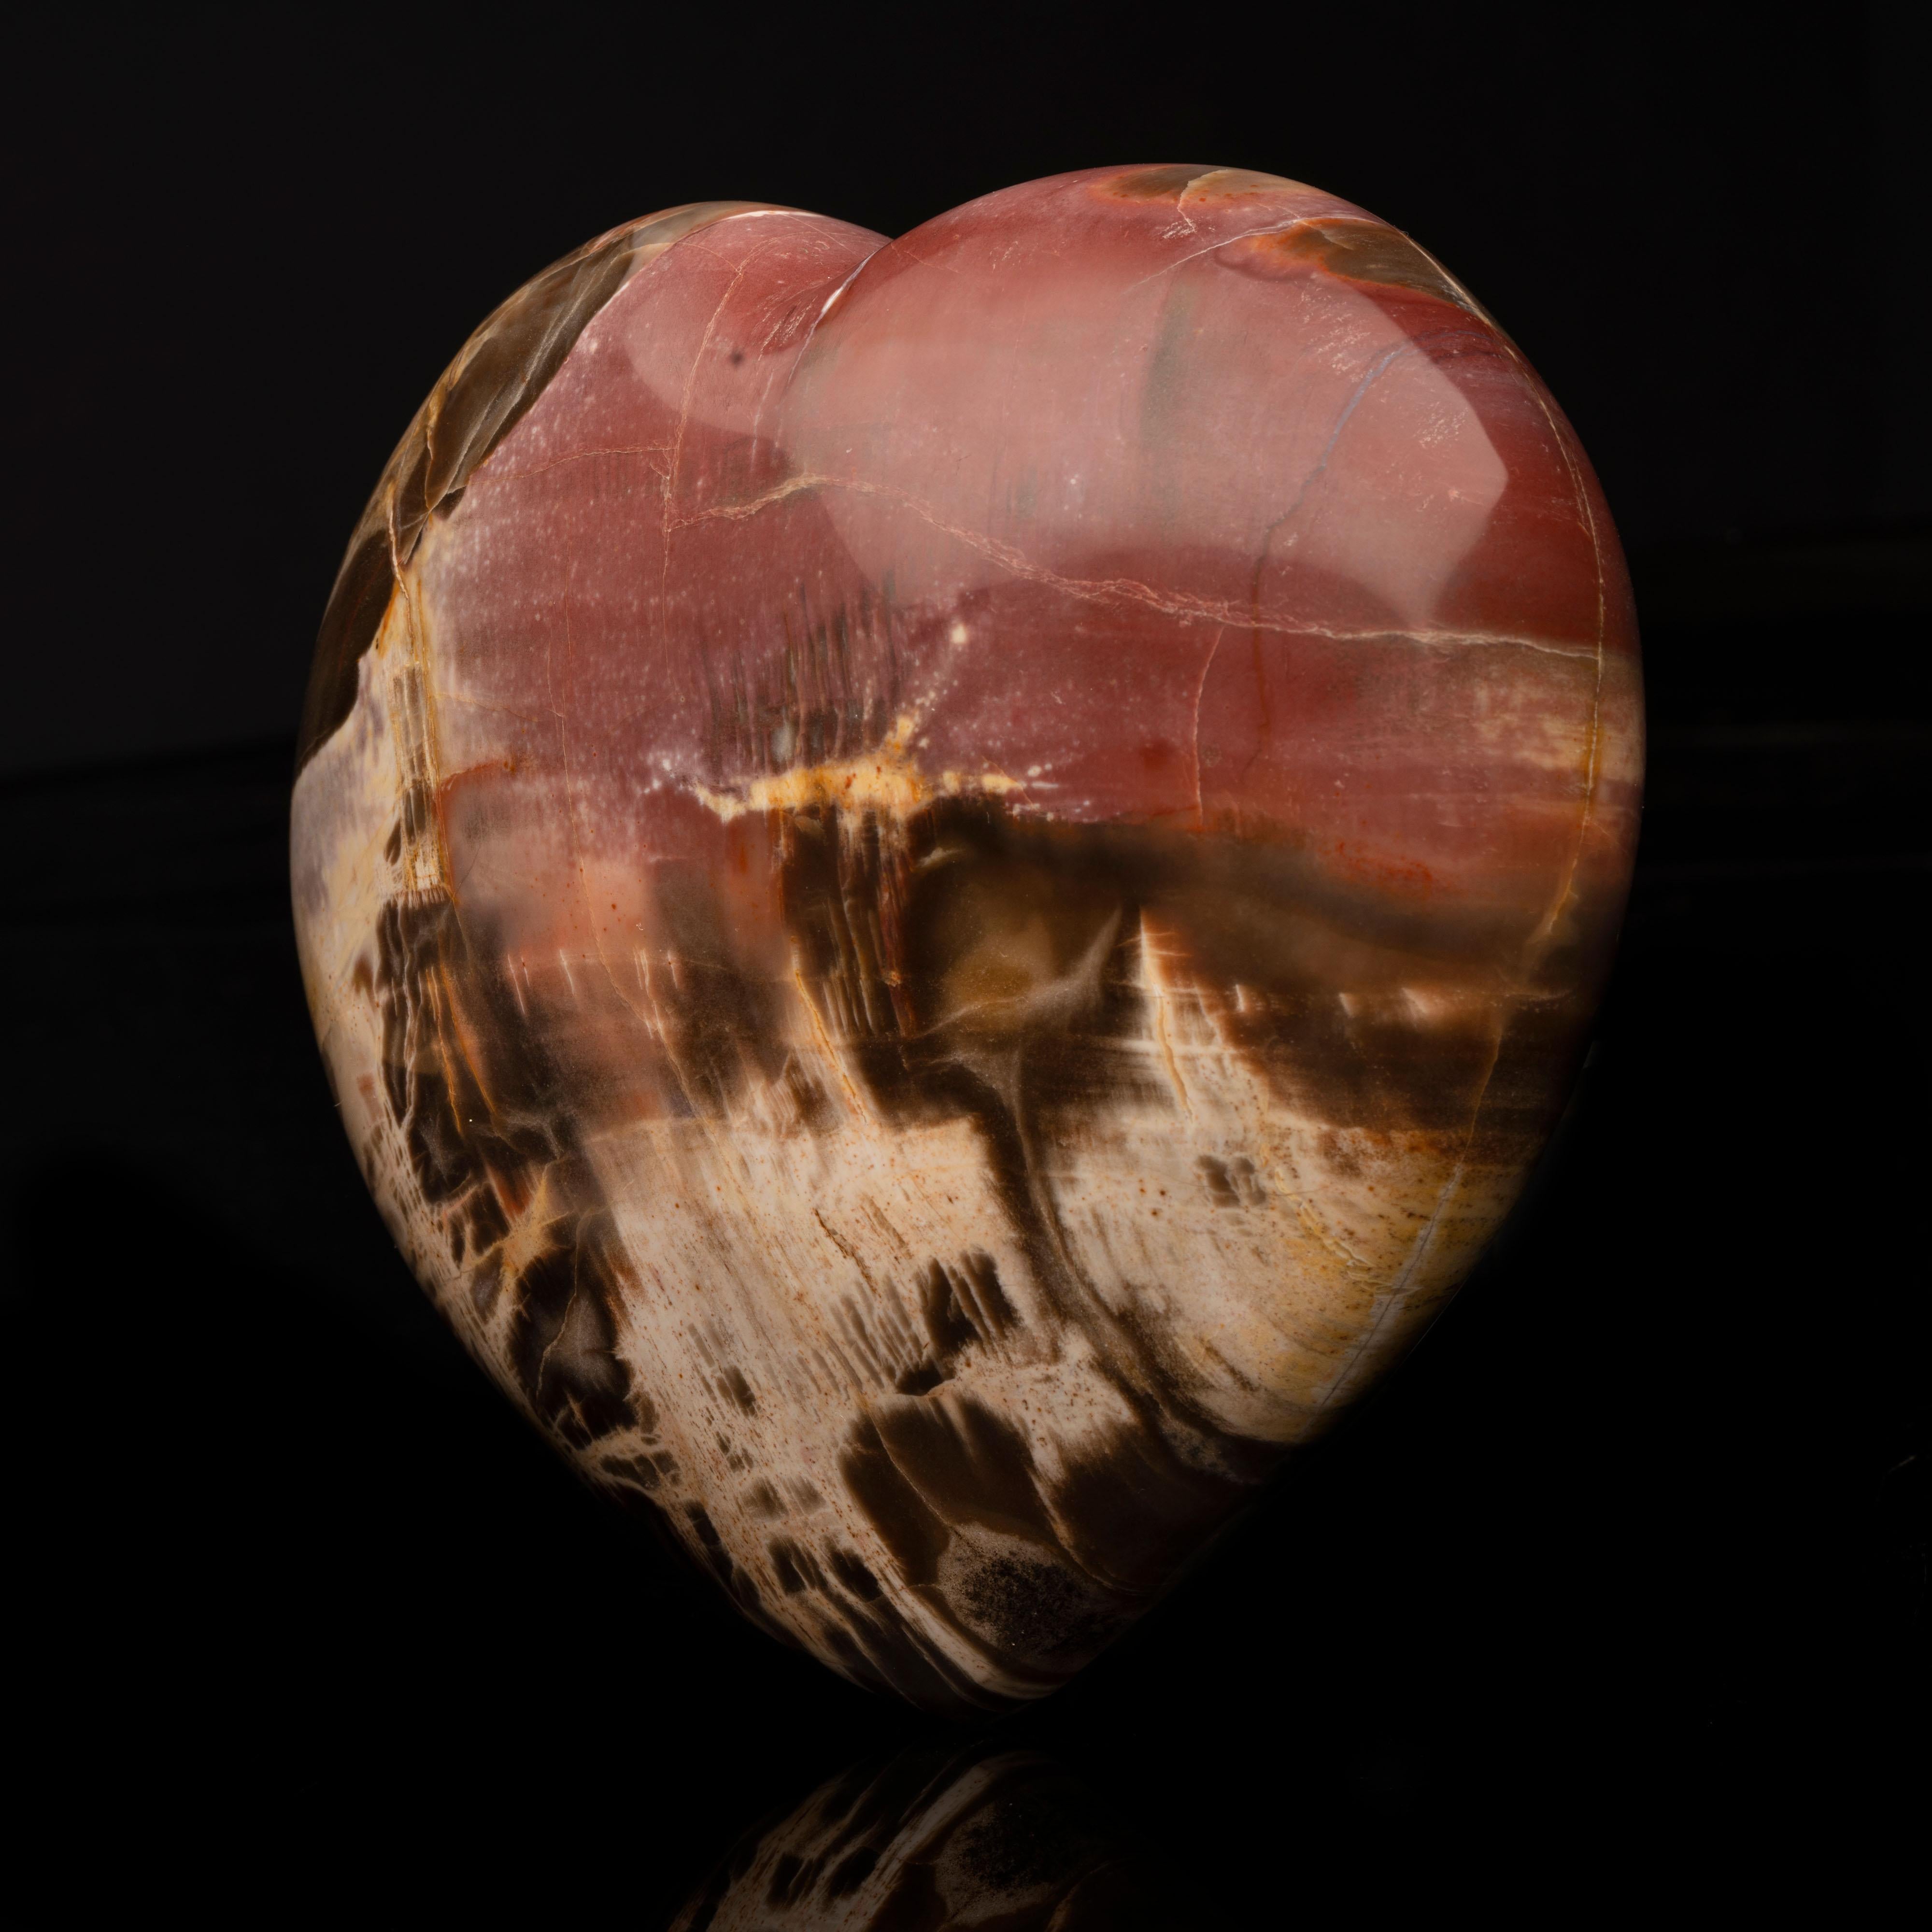 Approximately 220 million years old, this nearly three-pound heart has been hand-carved and hand-polished out of genuine fossilized wood and displays sumptuous red, black, brown, and tan tones. Petrified wood from the forests of Madagascar is famous